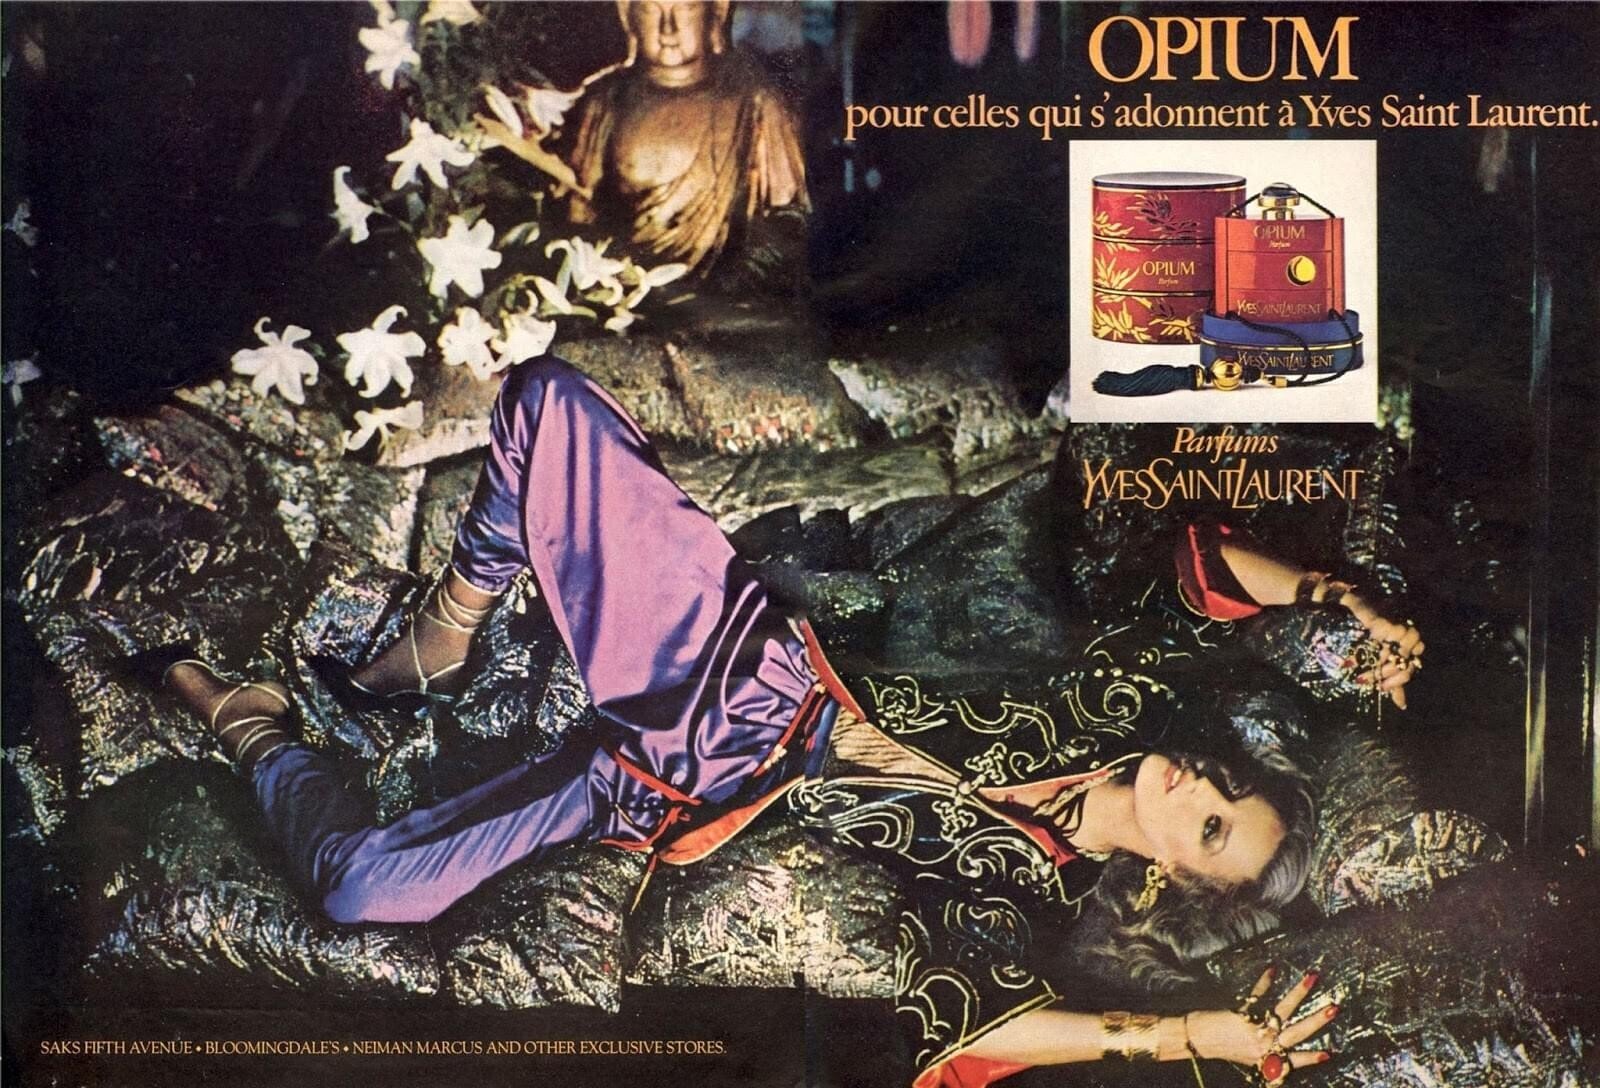 Inspired by China, Yves Saint Laurent launched the perfume Opium – and got  away with it